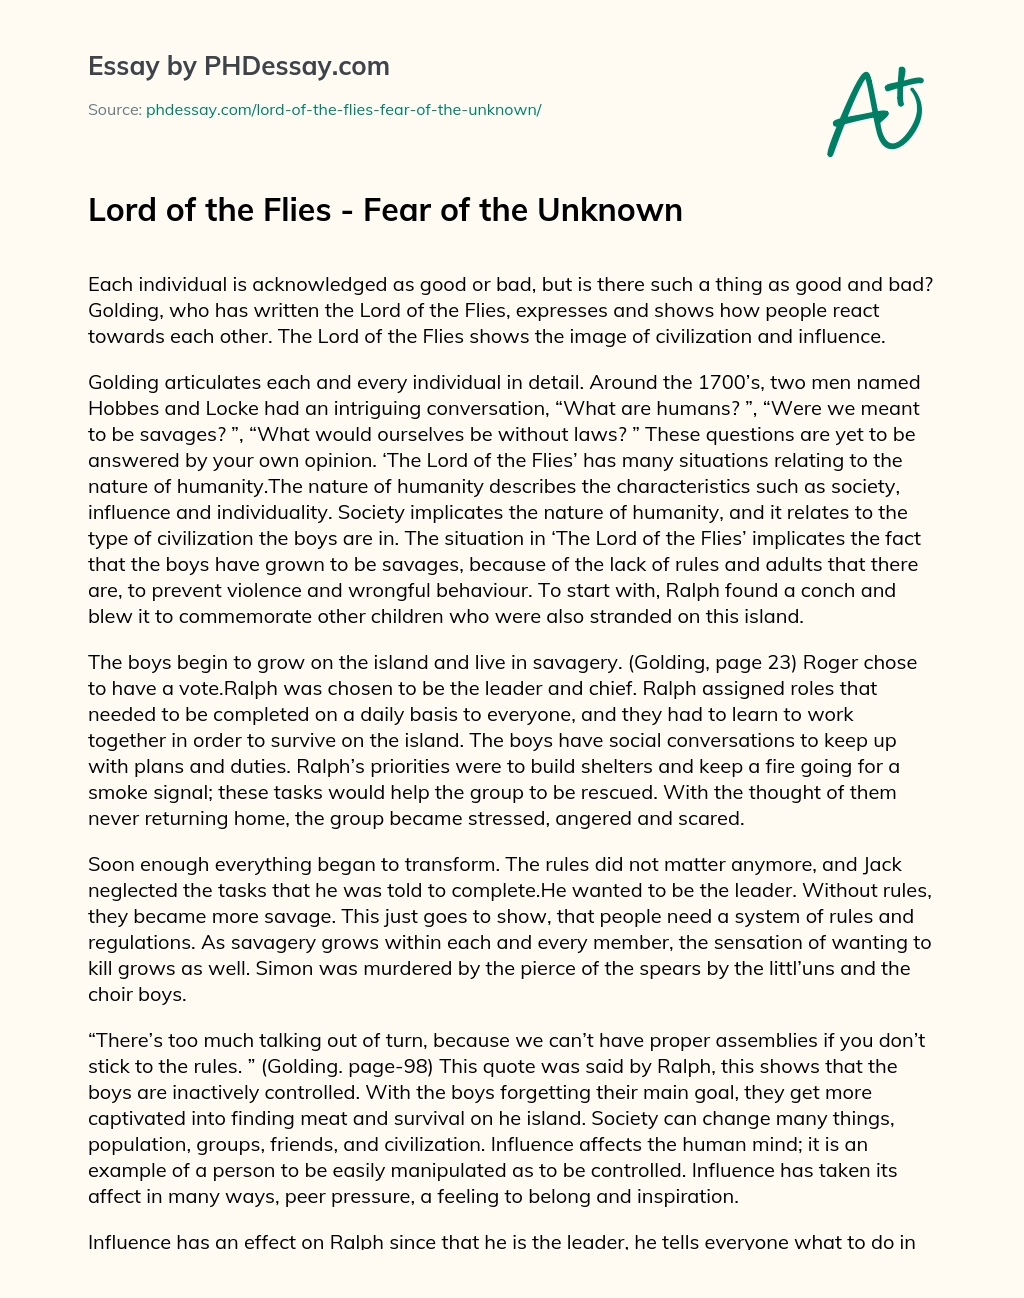 Lord of the Flies – Fear of the Unknown essay